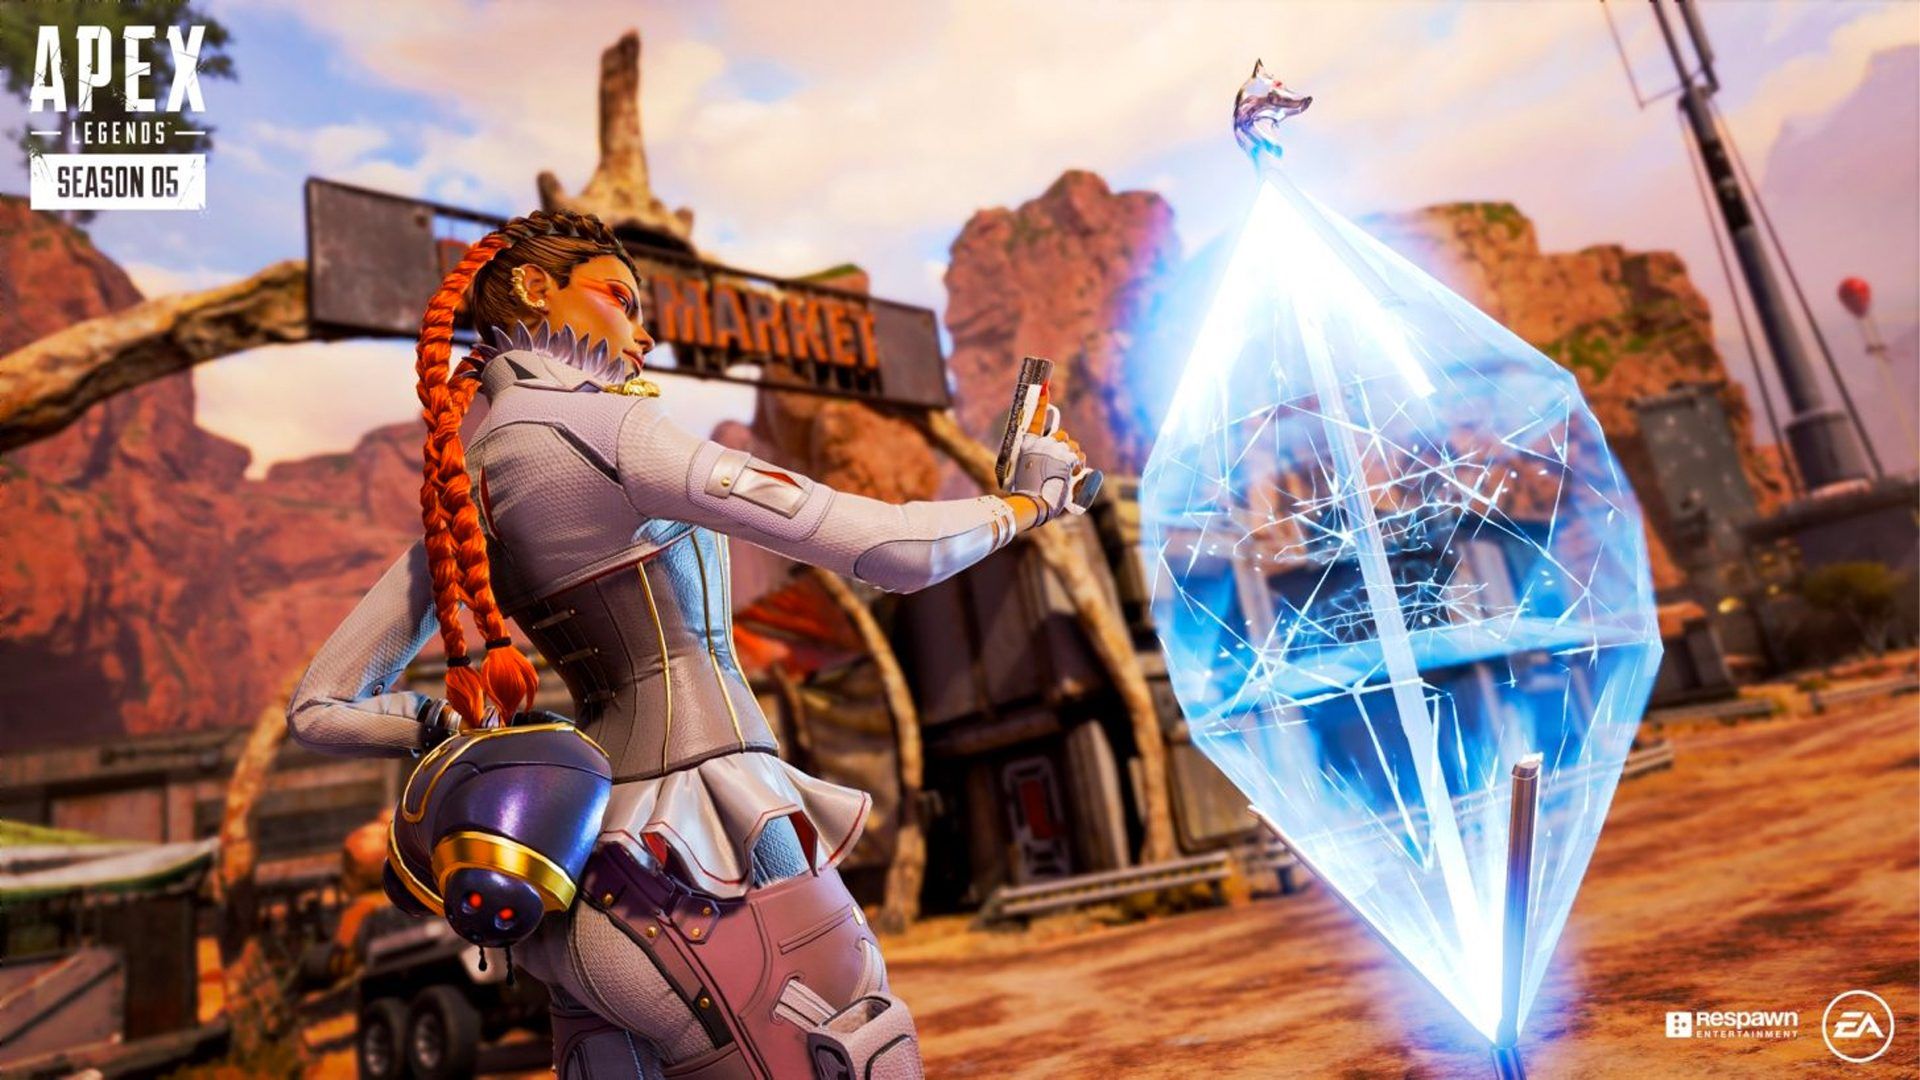 Loba steals the show in Apex Legends Season 5 on May 12